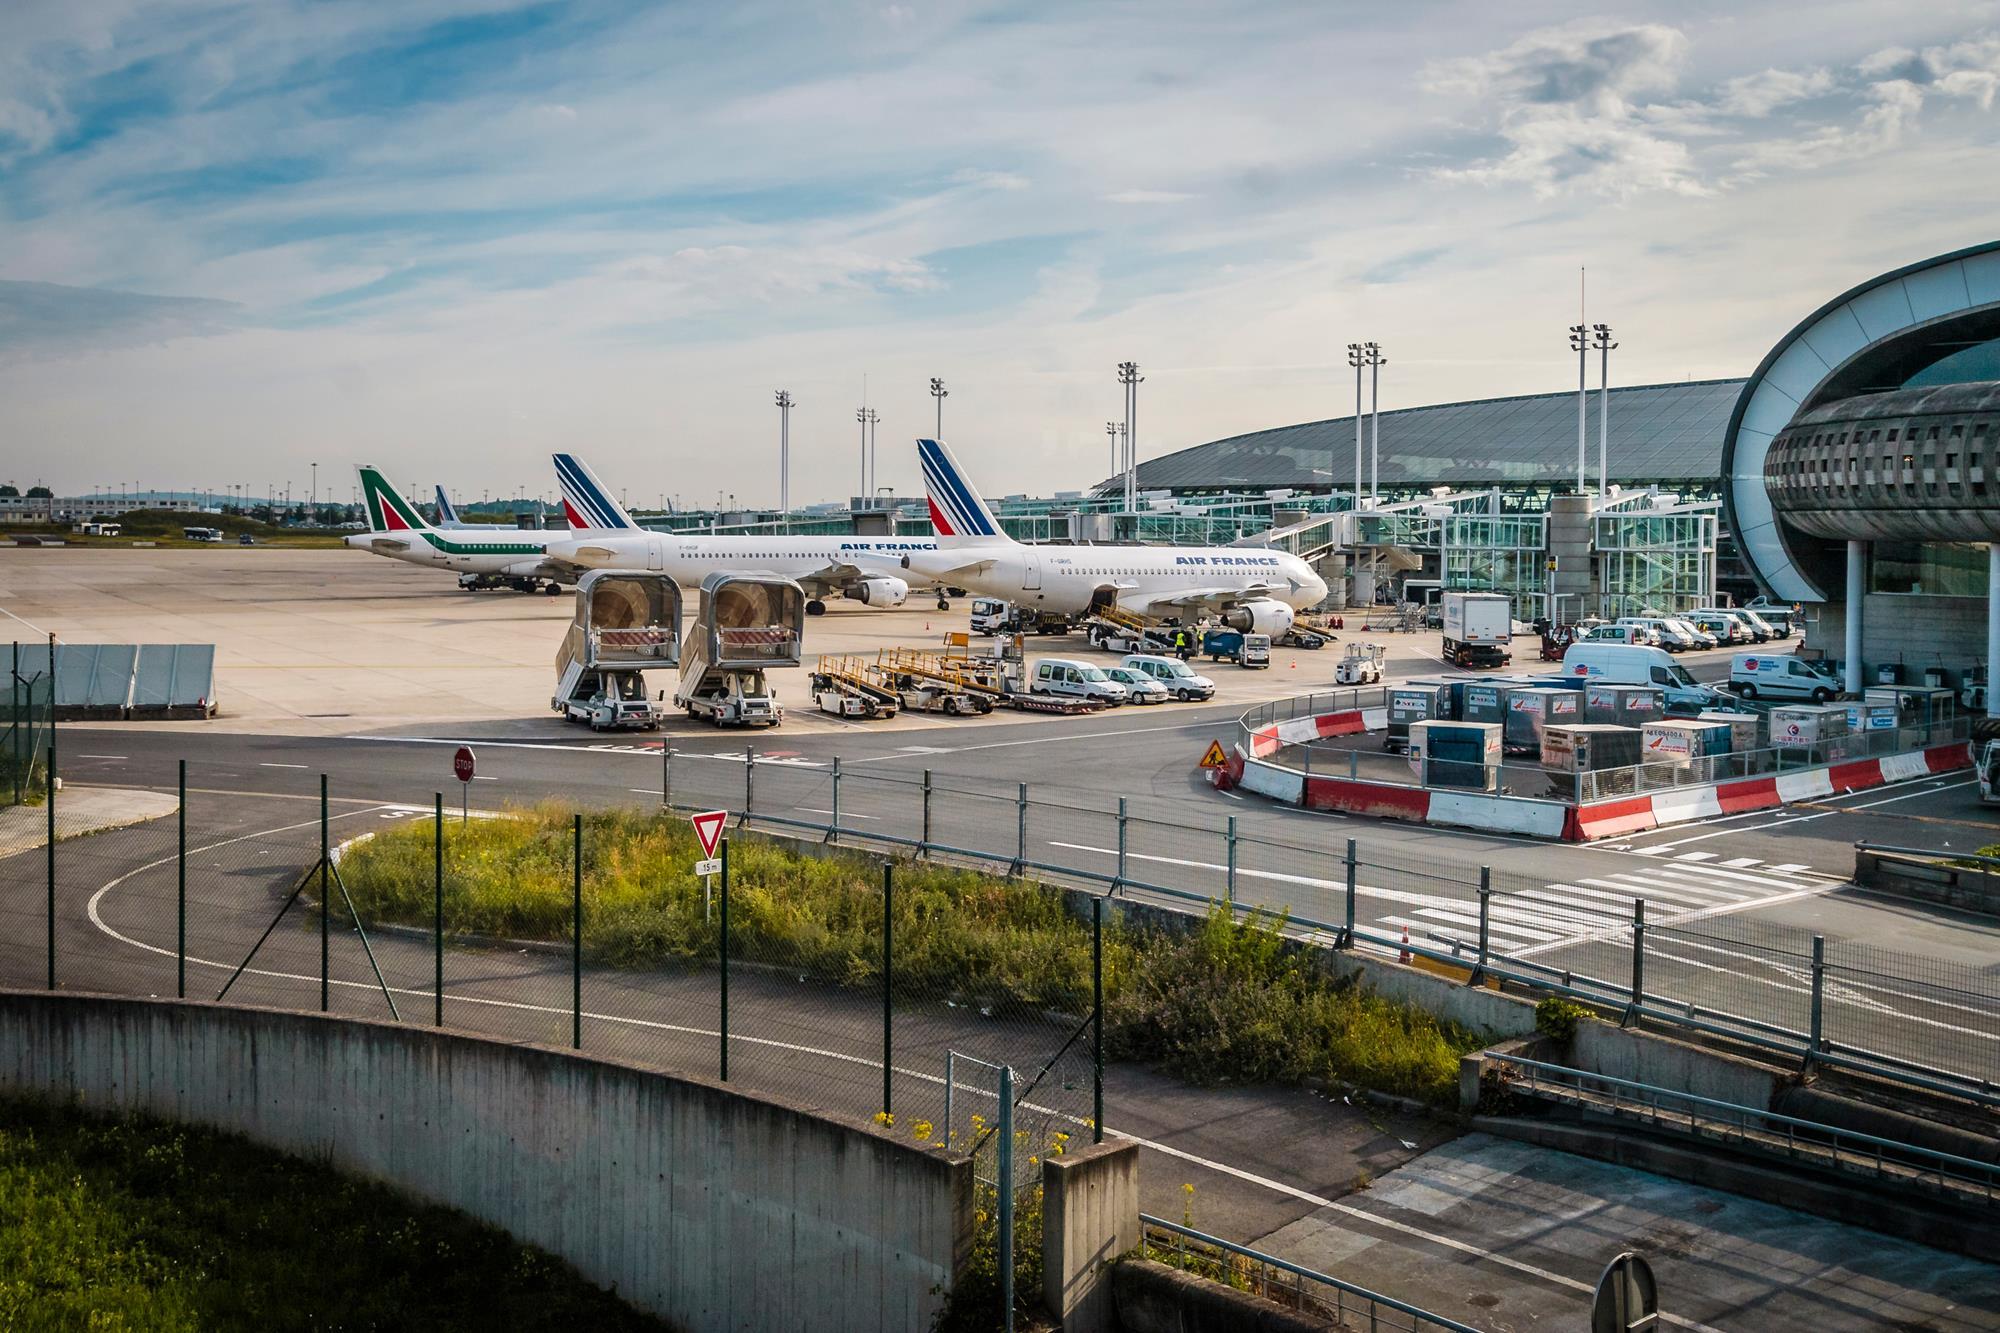 Paris airports operator works on new plan after Charles de Gaulle